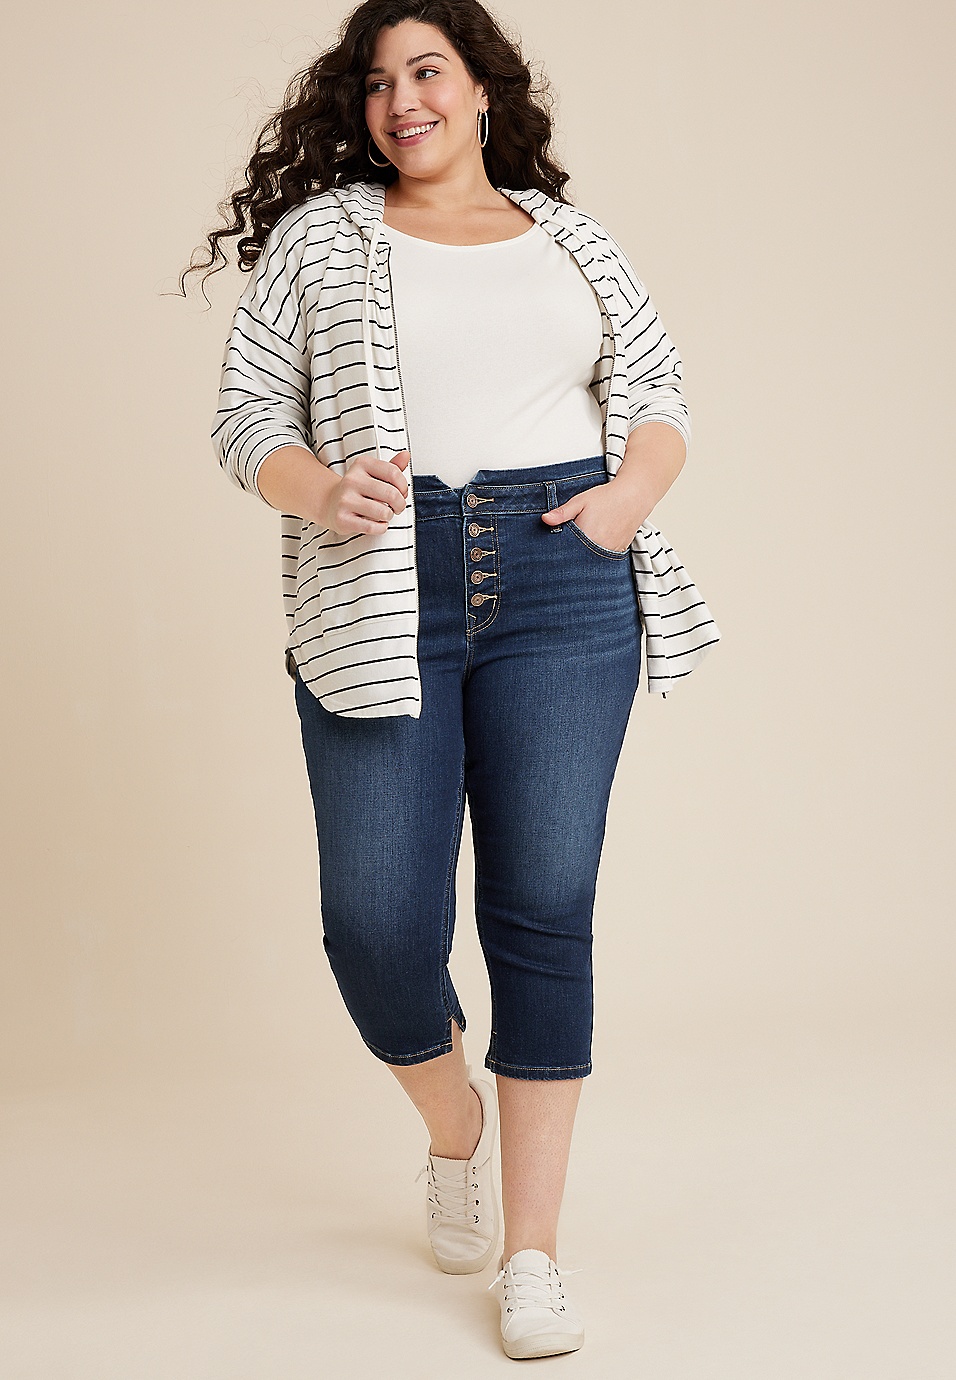 The Ultimate Plus Size Jeans Fit and Style Guide  Curvy fashionista, Plus  size jeans, Best plus size jeans